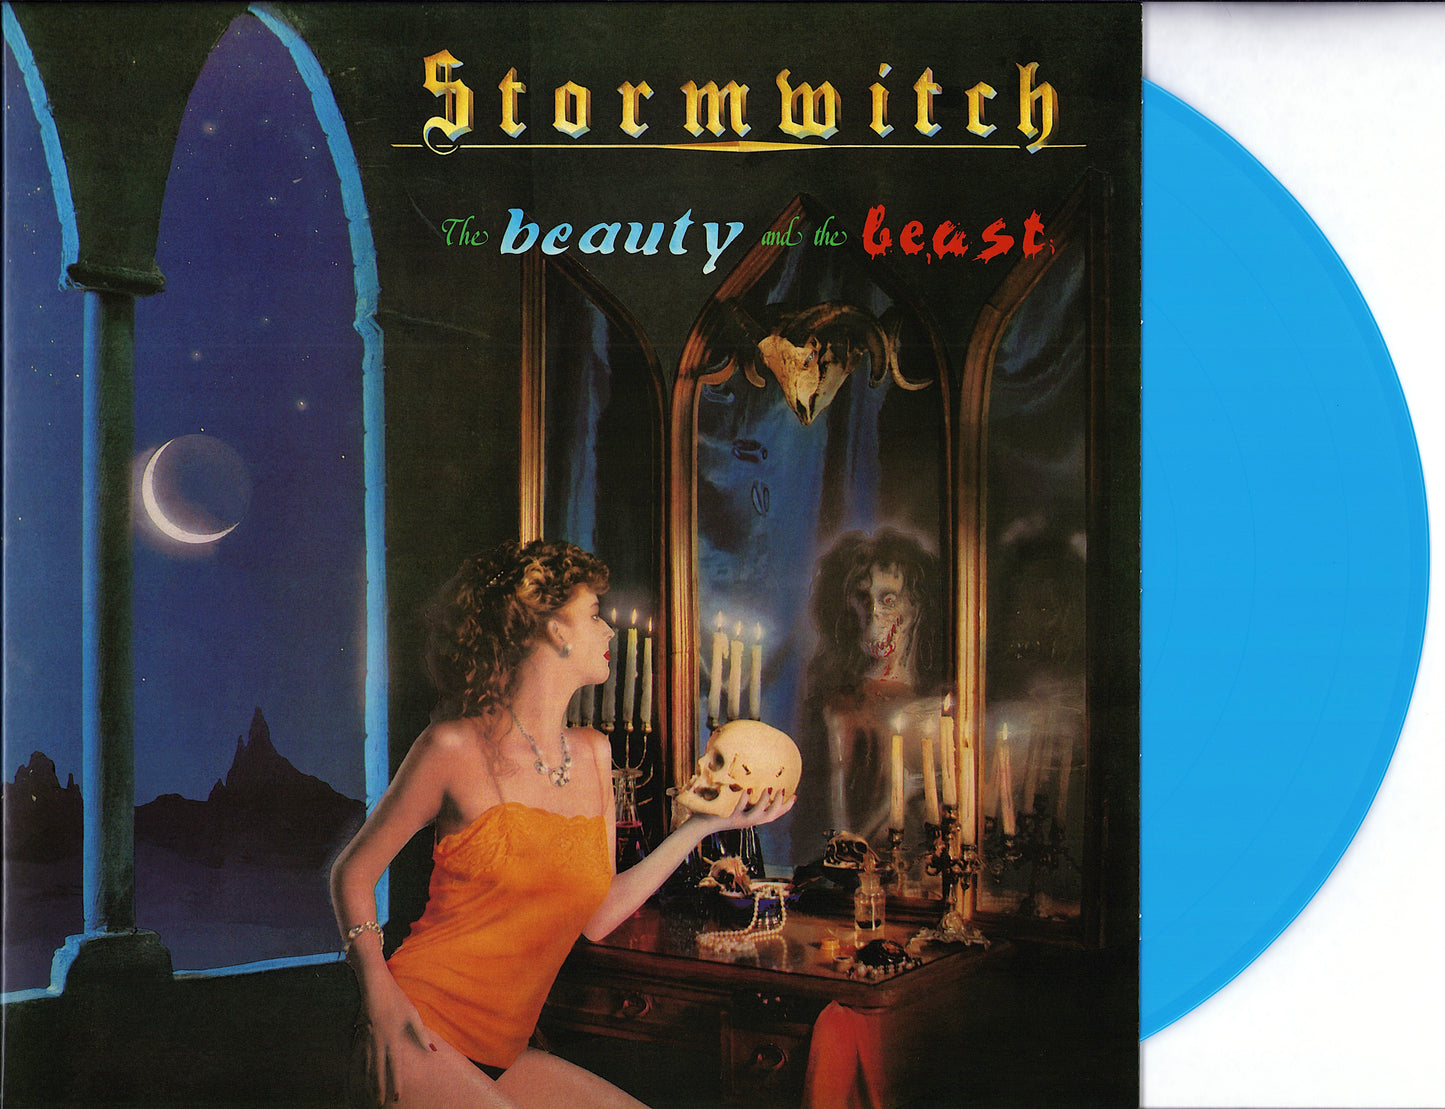 Stormwitch – The Beauty And The Beast Blue Vinyl LP Limited Edition